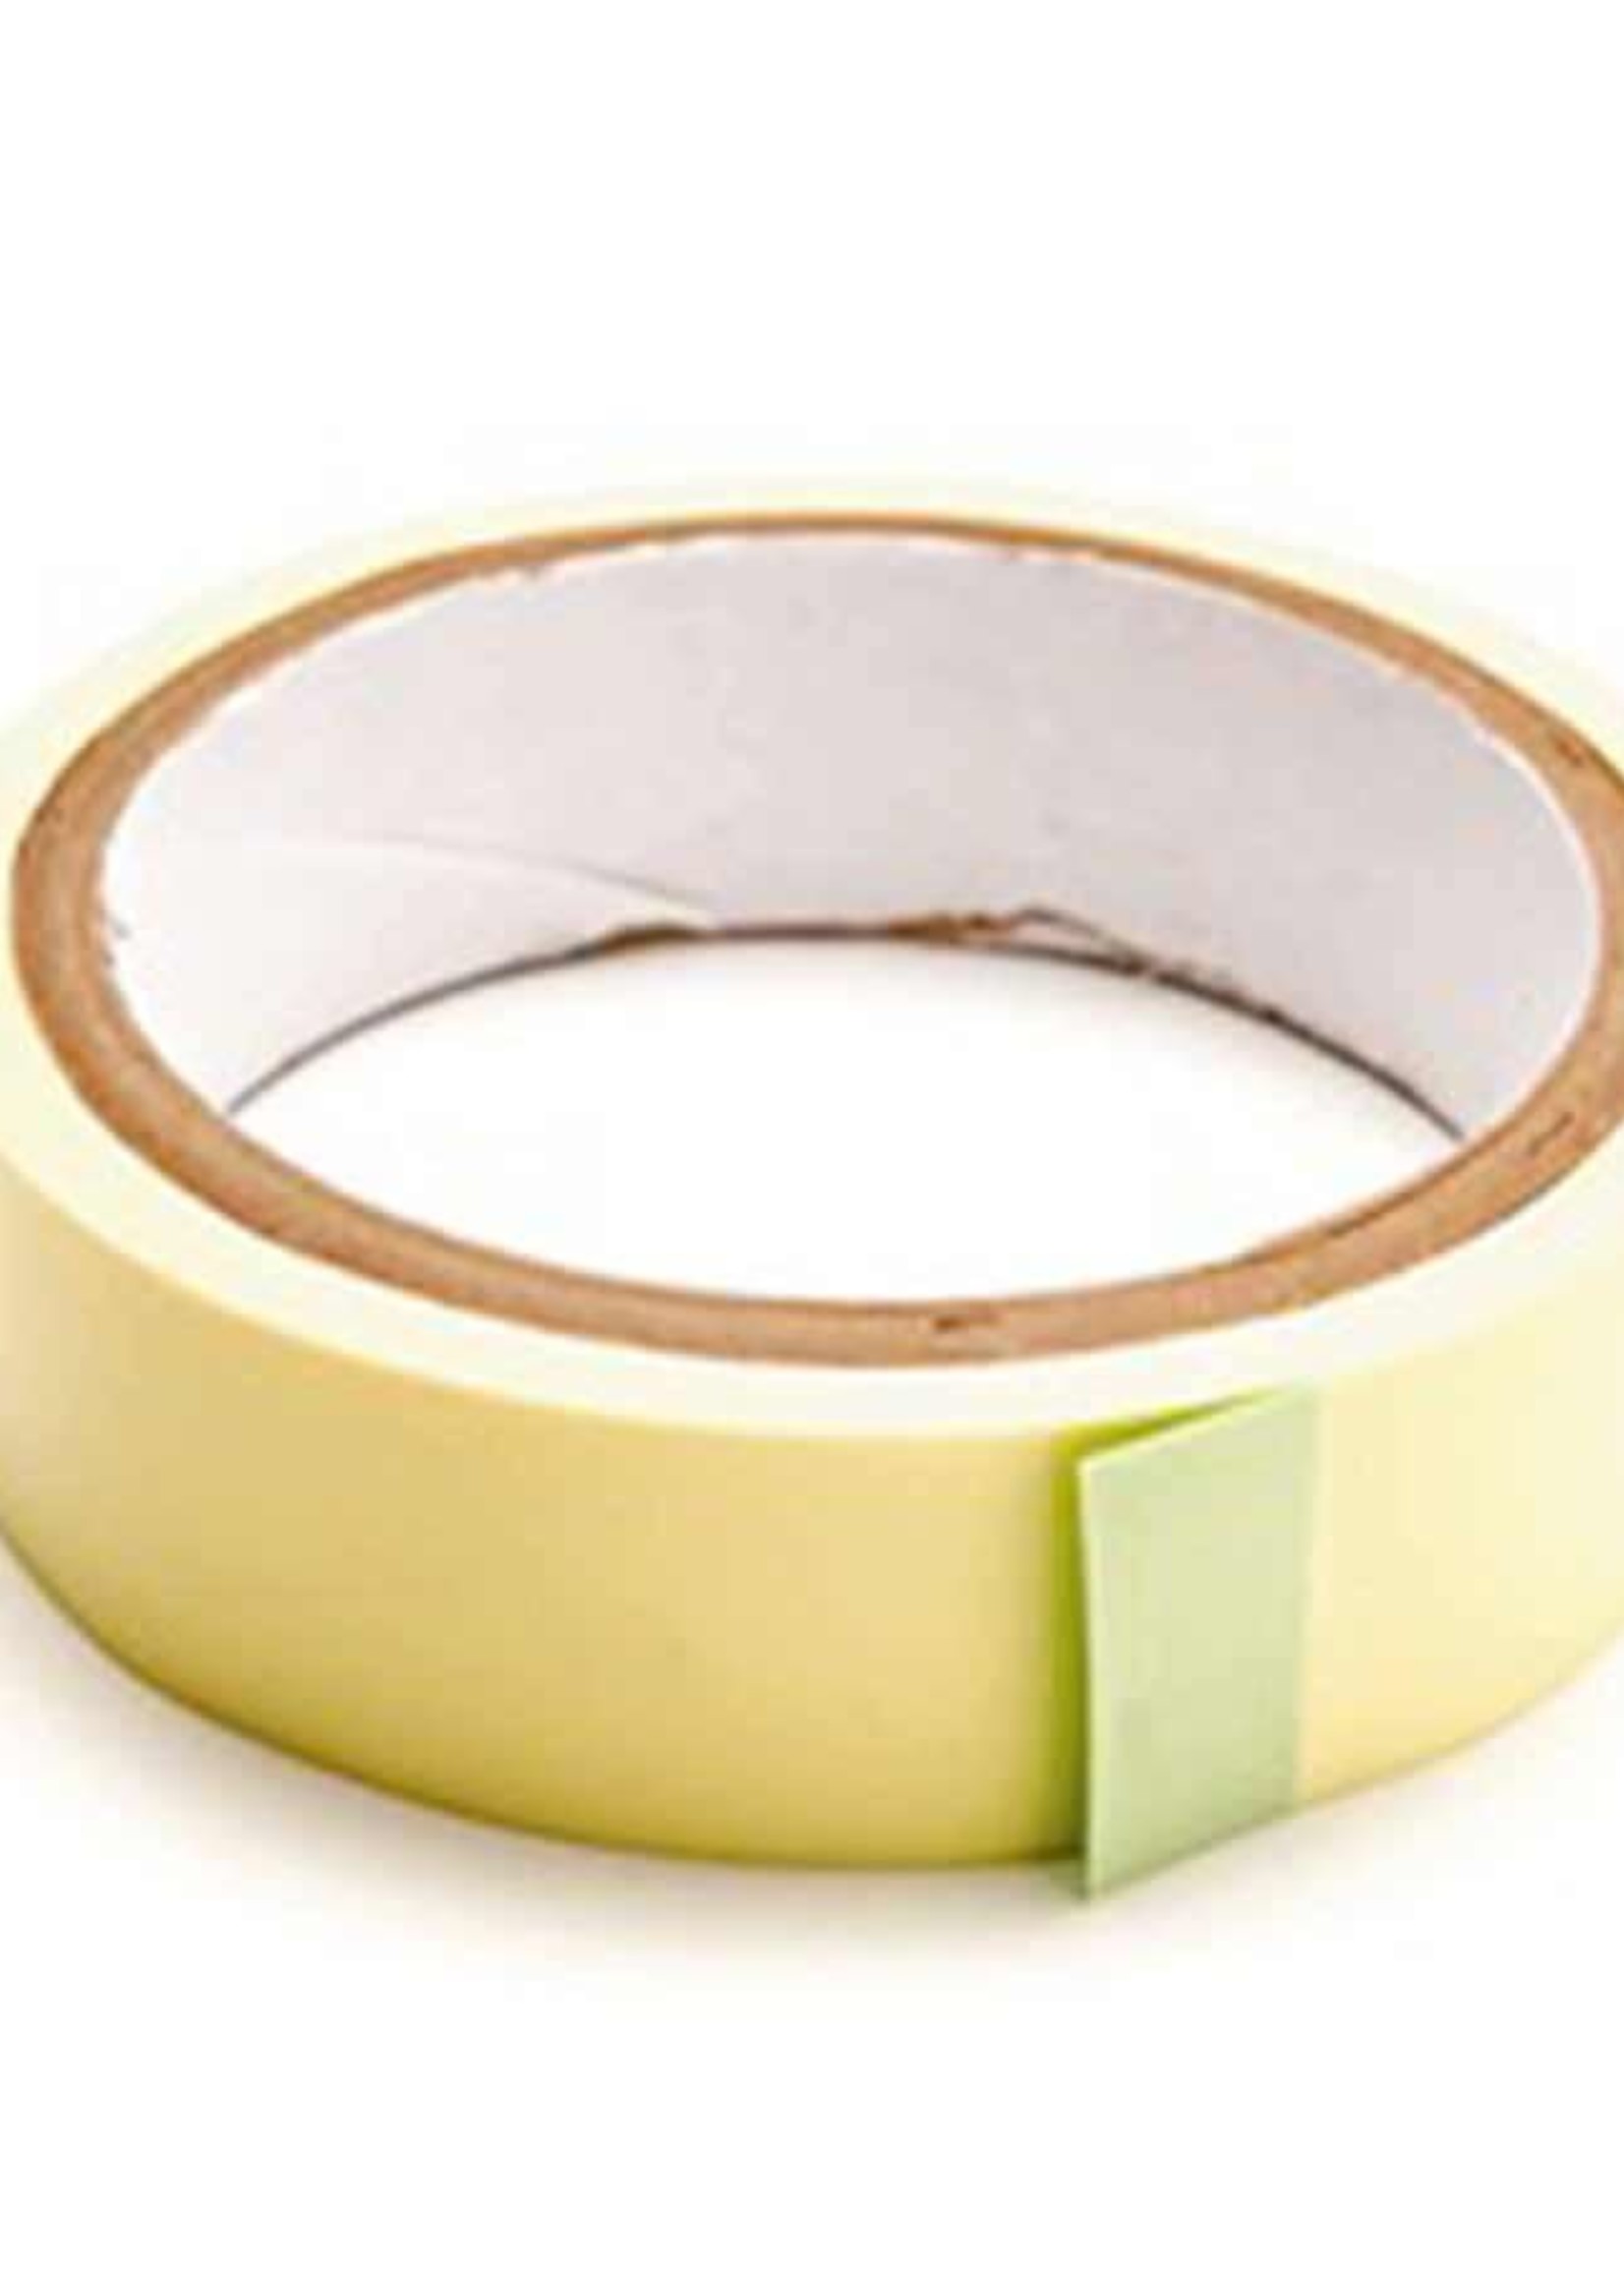 HLC Stan's No Tubes, Rim Tape, Yellow, 36mm x 9.14m rolL